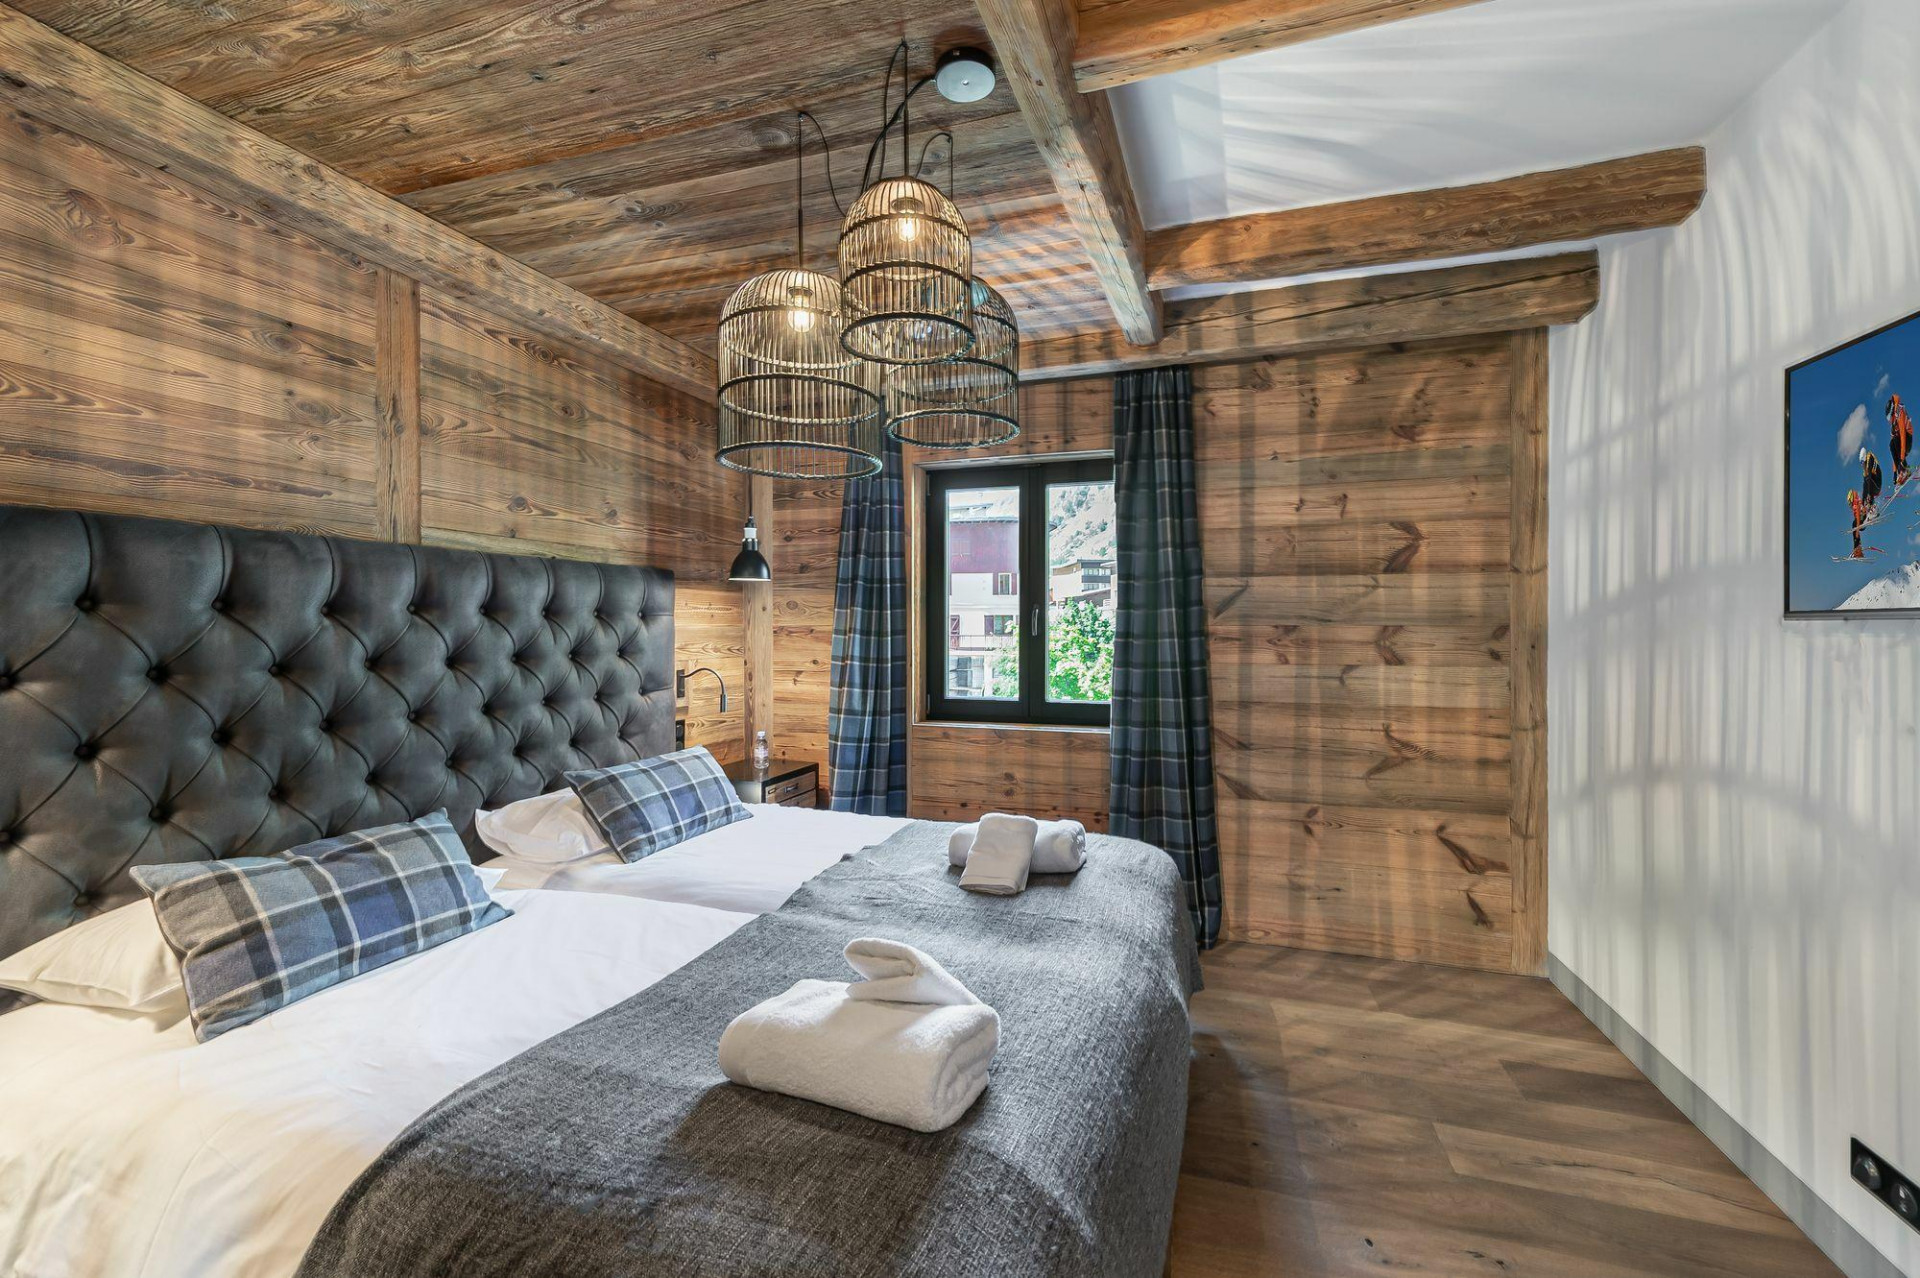 val-d-isere-location-appartement-luxe-valdin